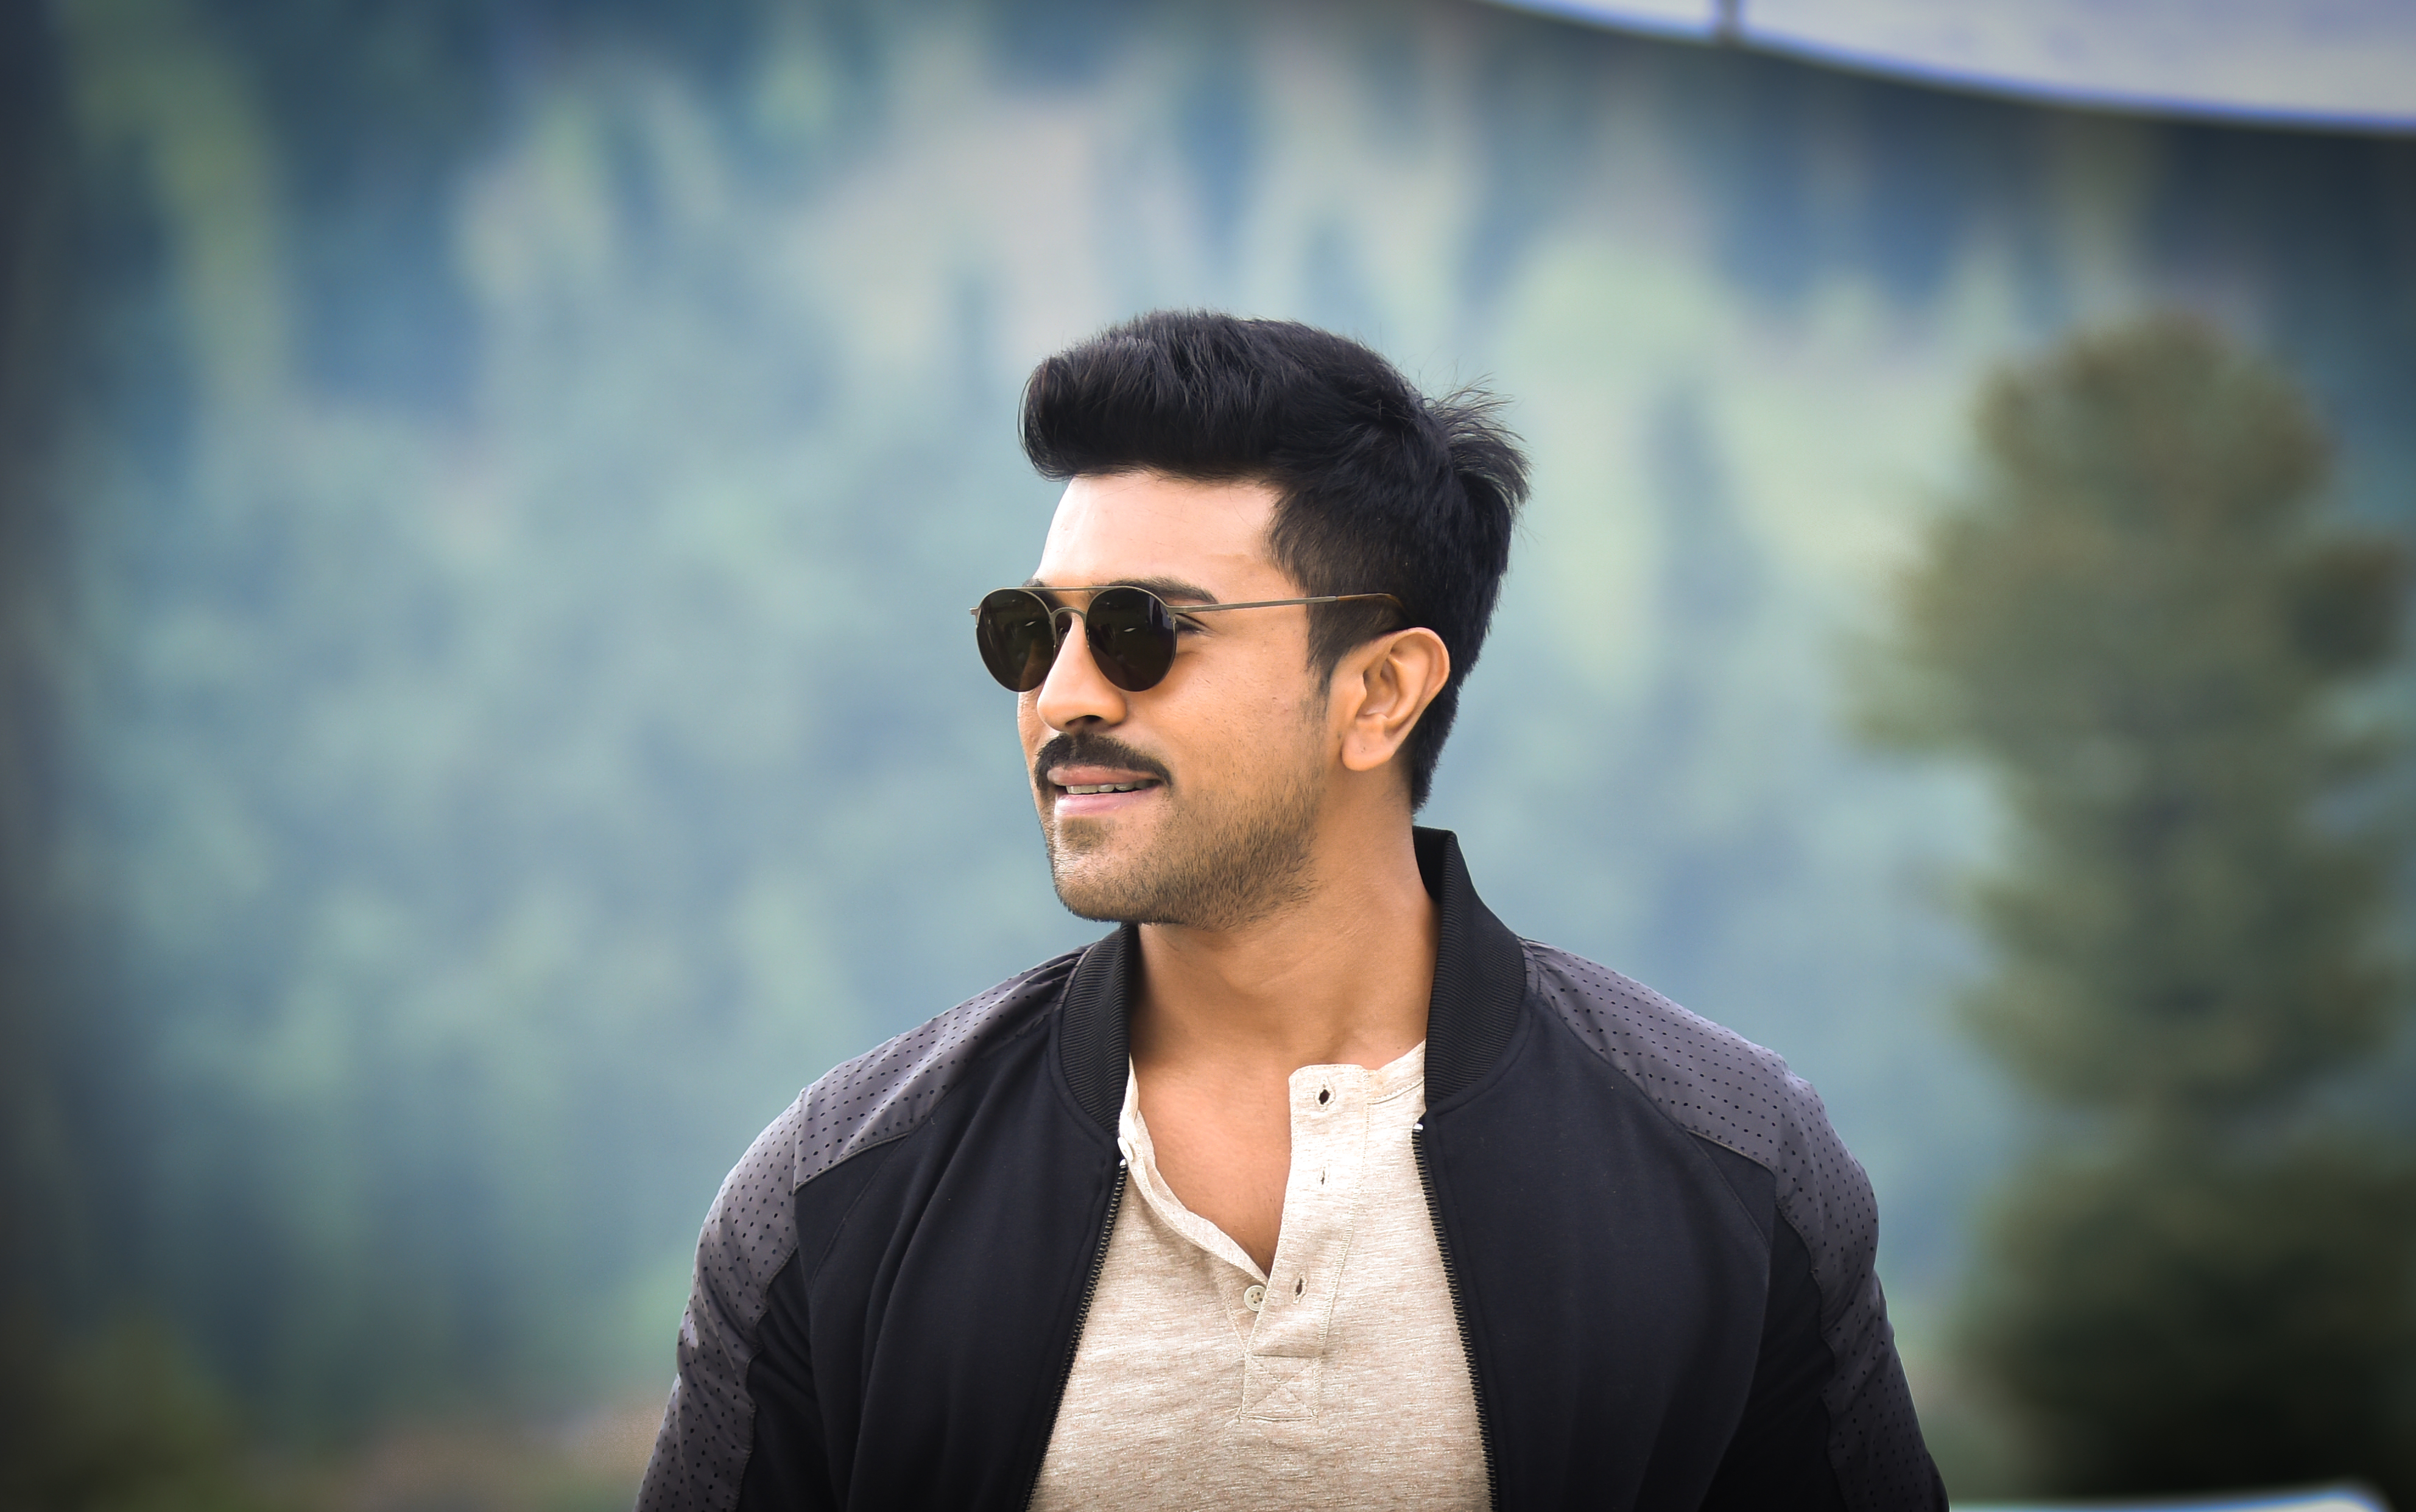 Ram Charan - Just wrapped shoot ...Always Feels GRT to be back in #kashmir  .. This place is beyond words.... | Facebook